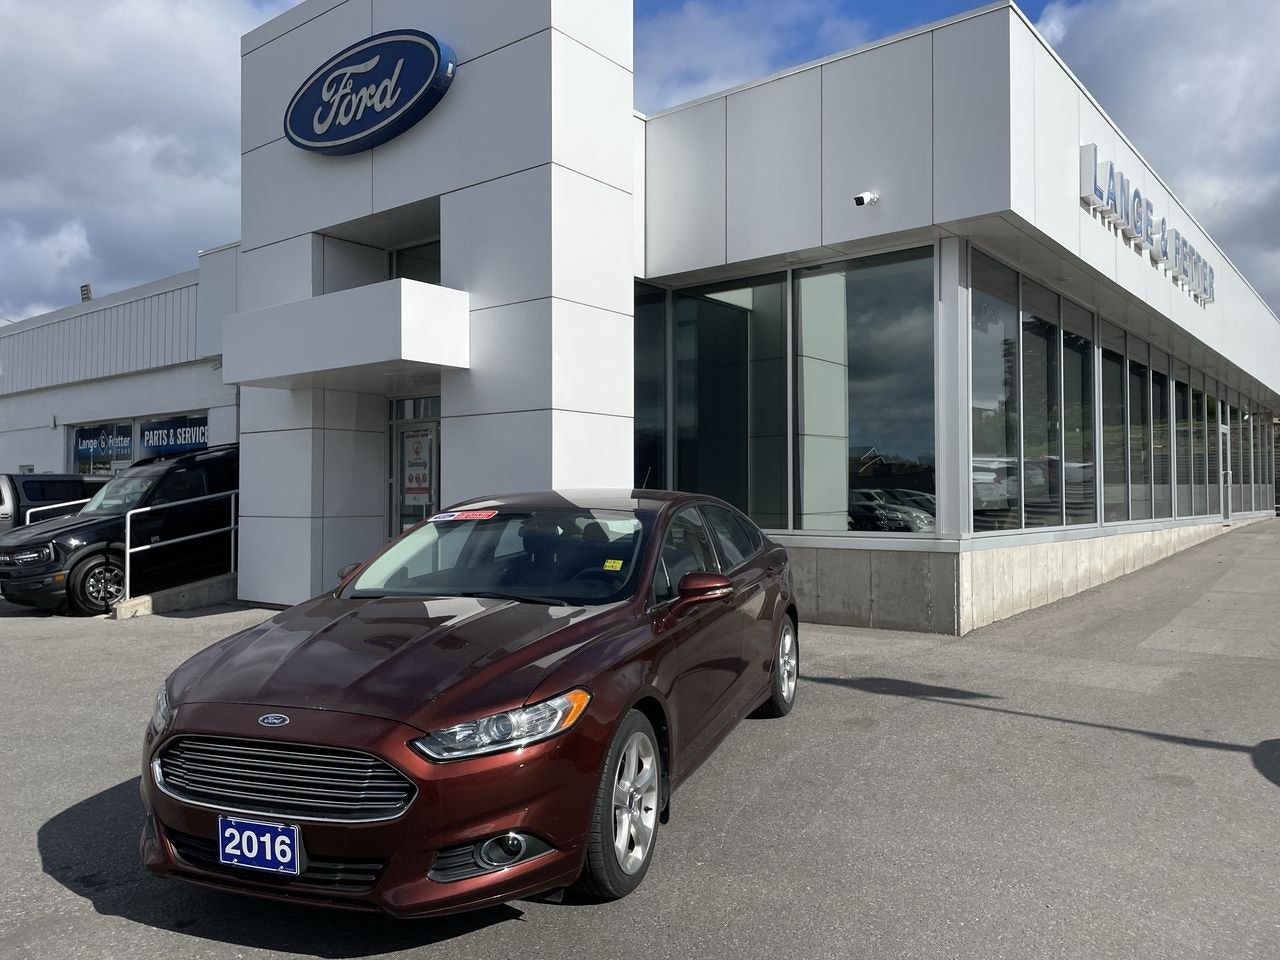 2016 Ford Fusion - P21337 Full Image 1